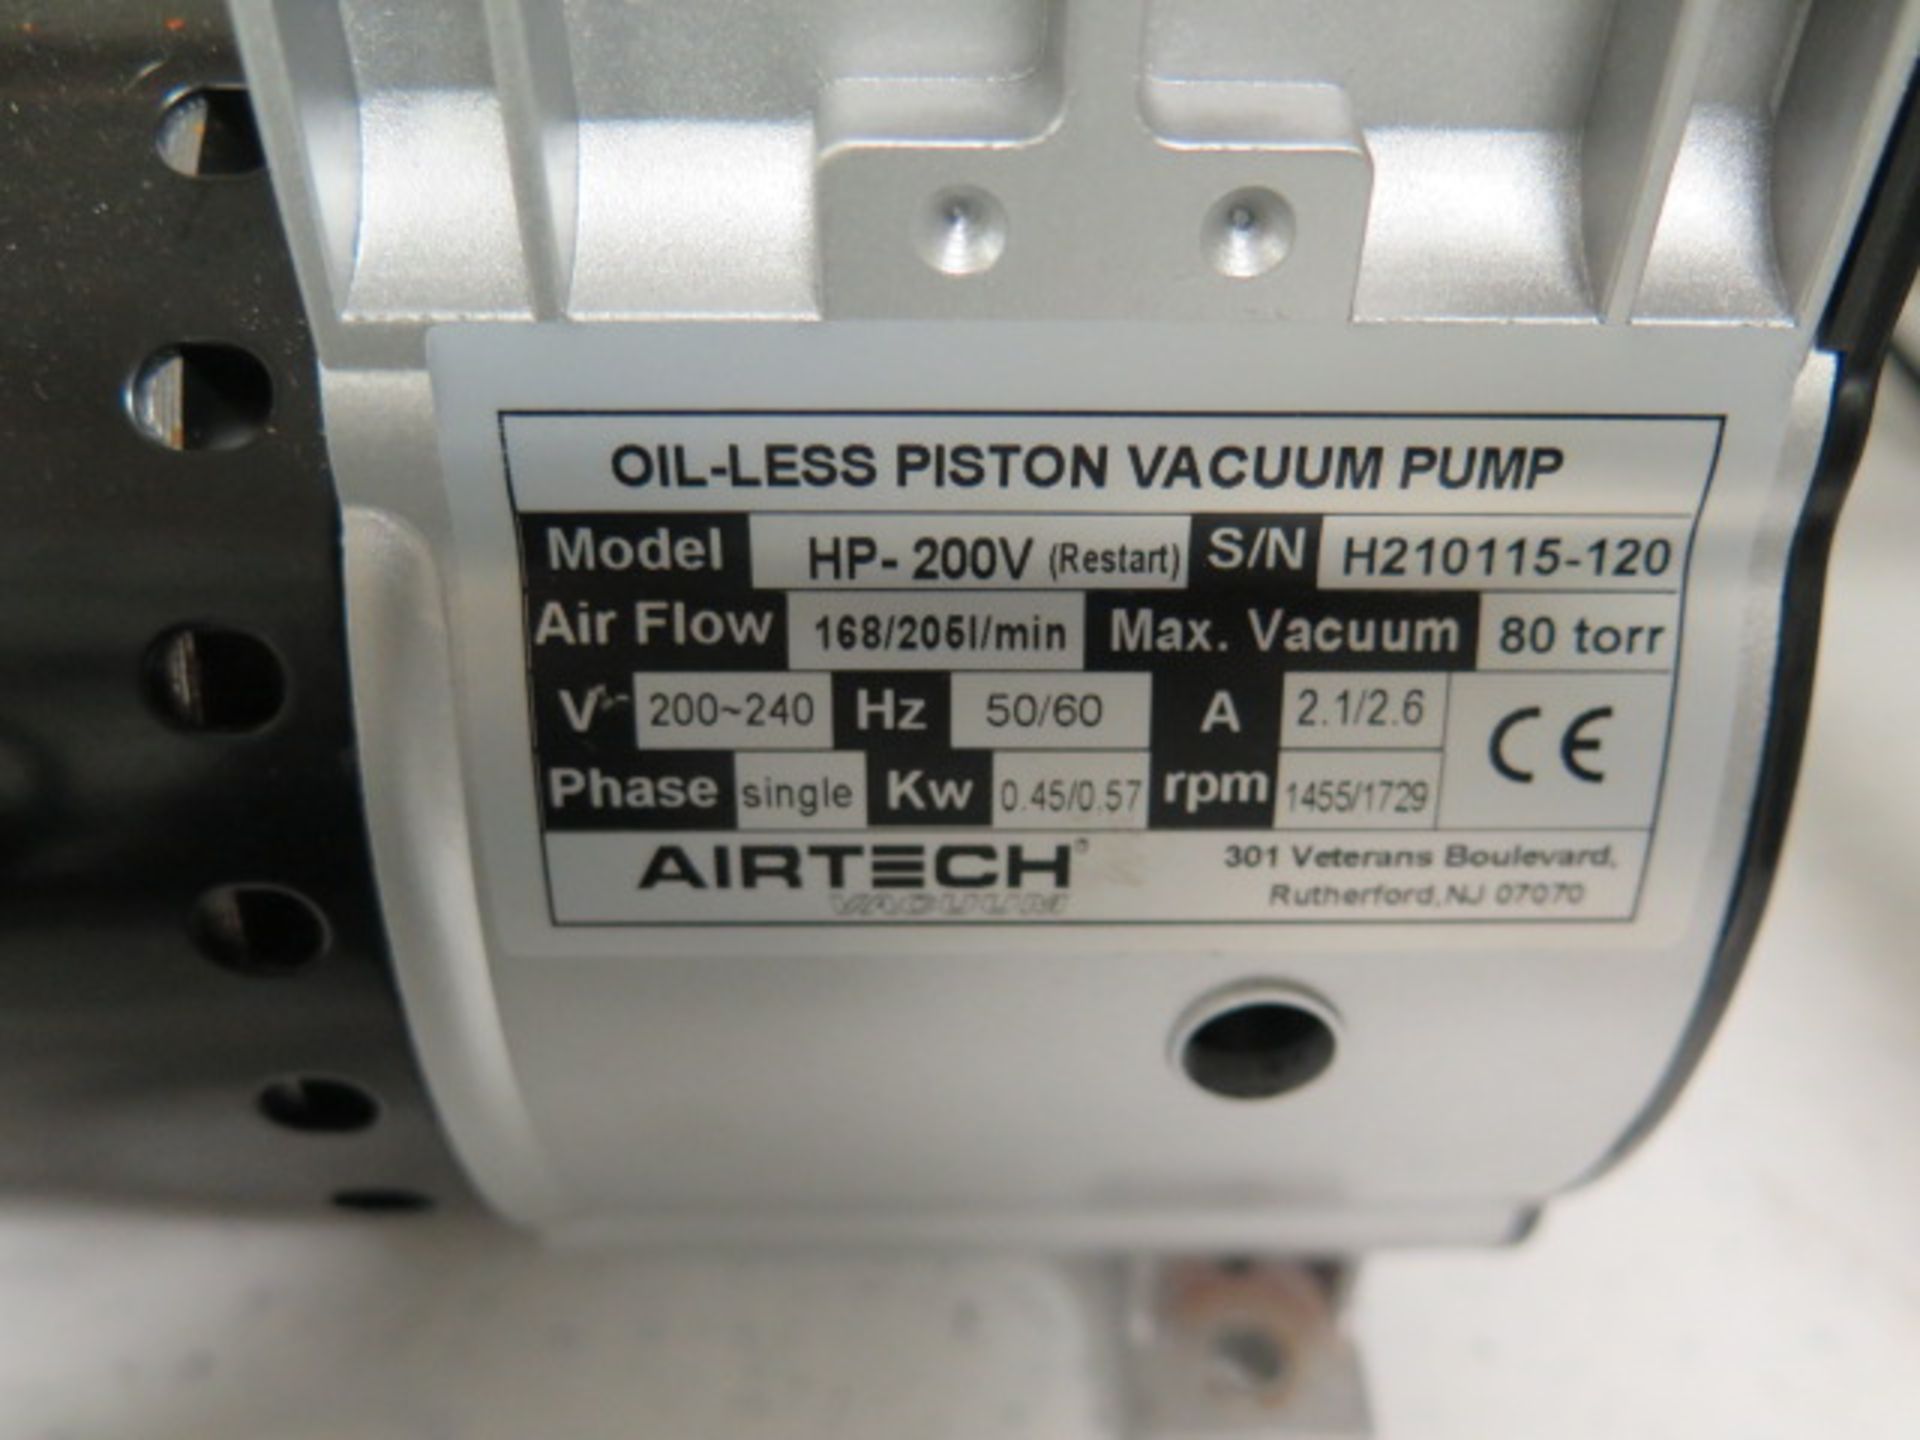 Airtech HP-200V 80 torr Vacuum Pumps (2) 200-240V (SOLD AS-IS - NO WARRANTY) - Image 6 of 6